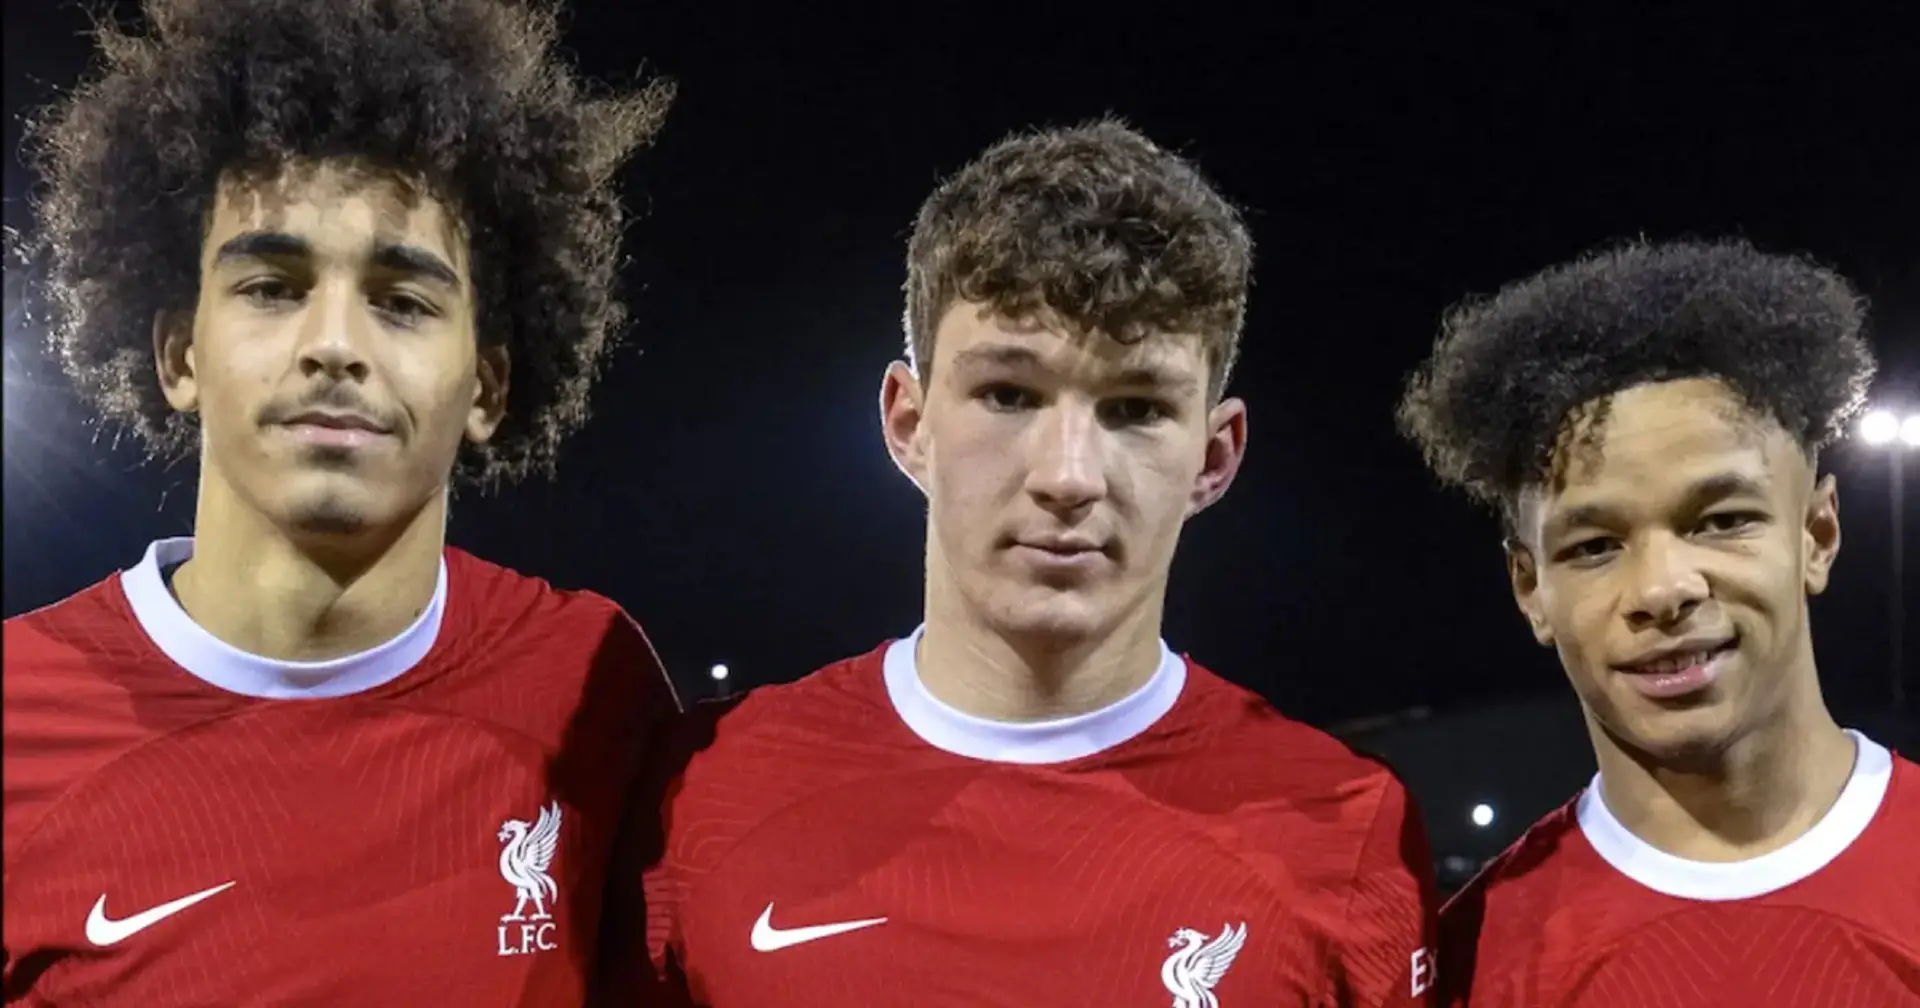 Liverpool smash Arsenal 7-1 in FA Youth Cup & 2 more under-radar stories